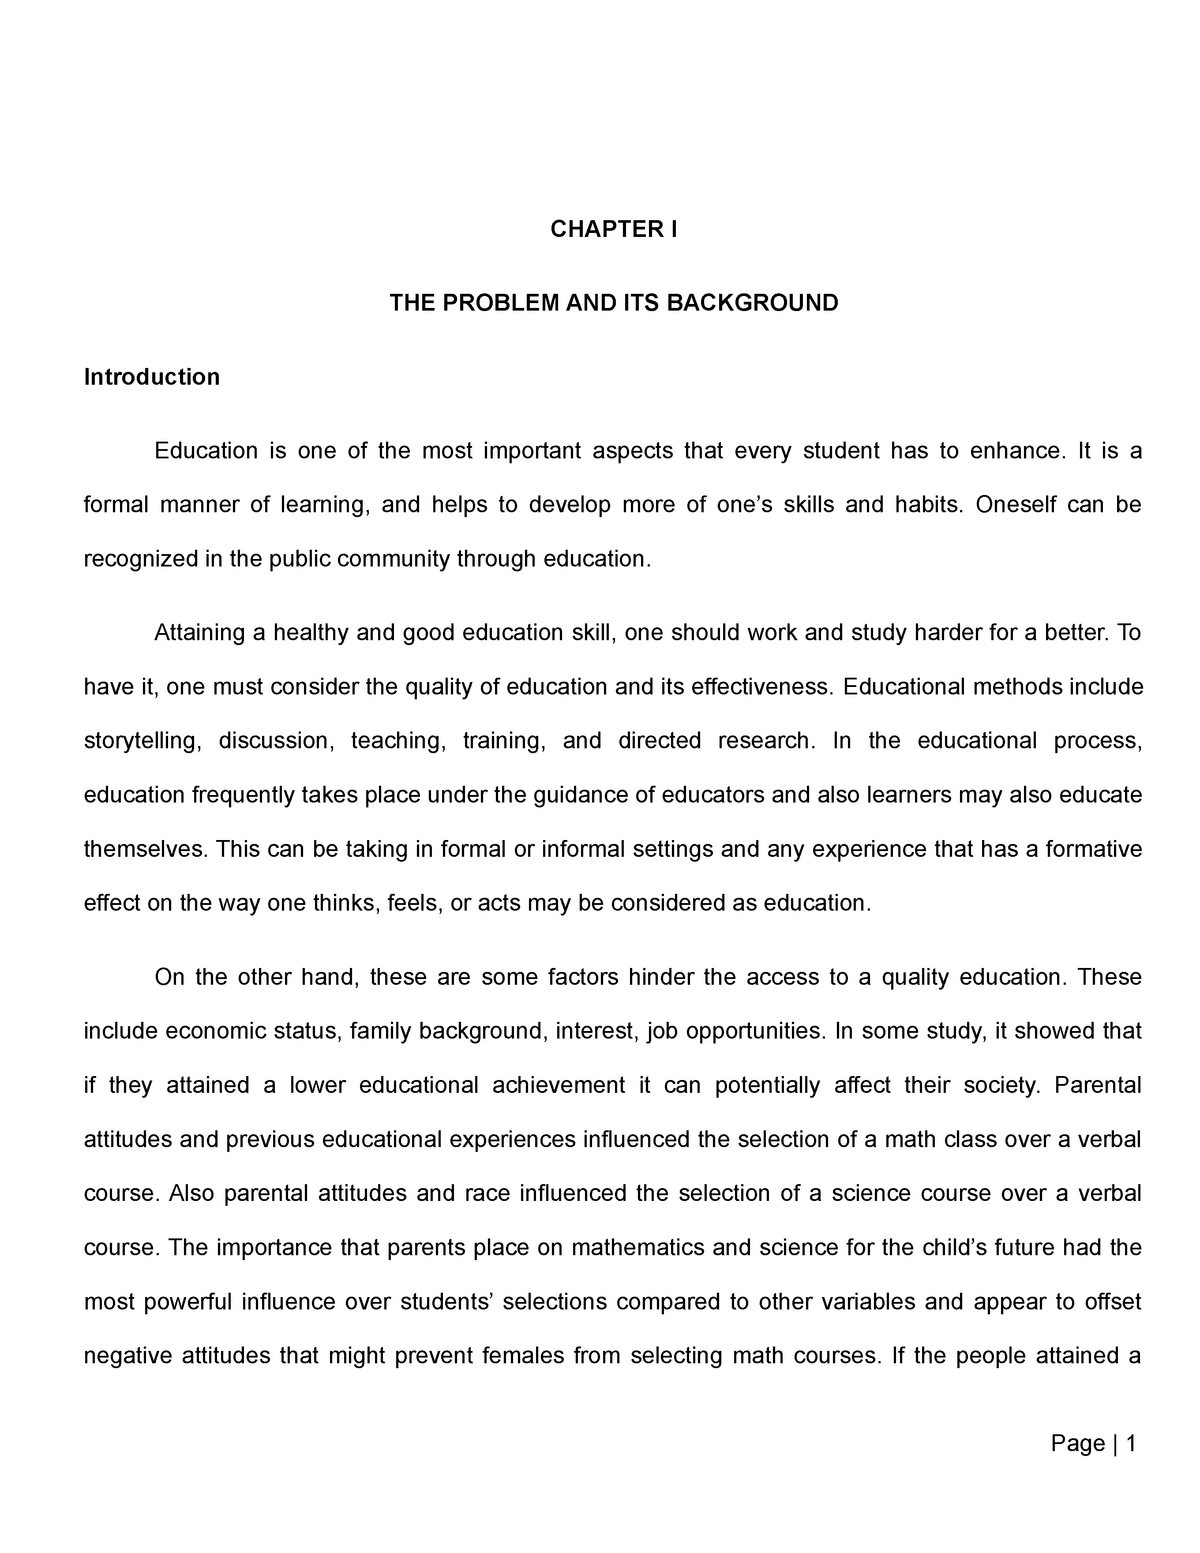 research paper about factors affecting students performance